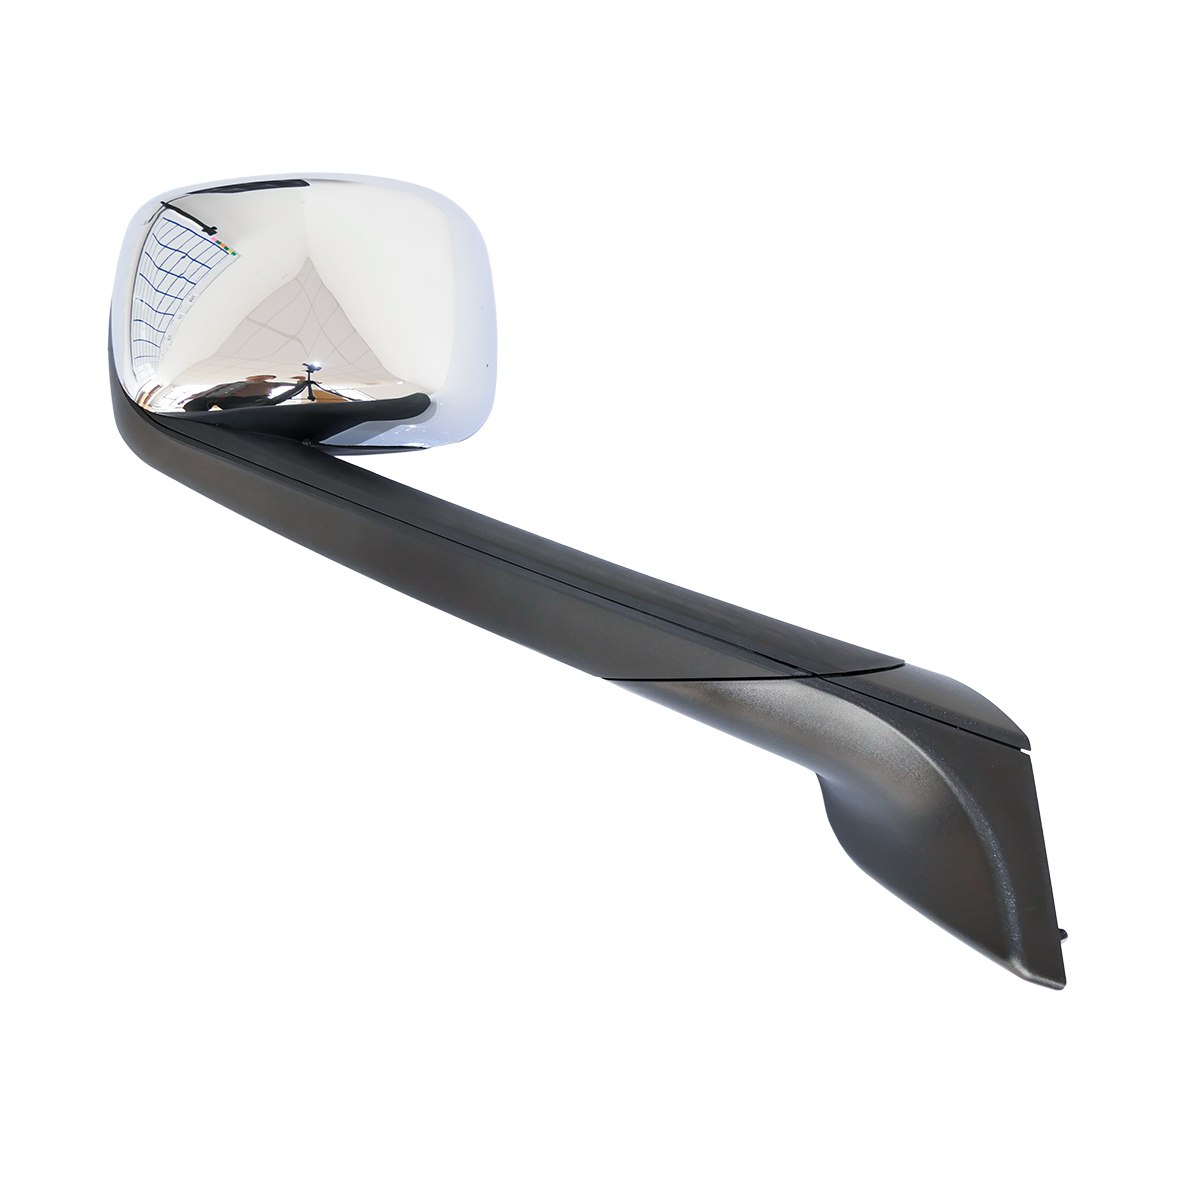 Freightliner New Cscadia Chrome Hood Mirror for American Truck Spare Parts 